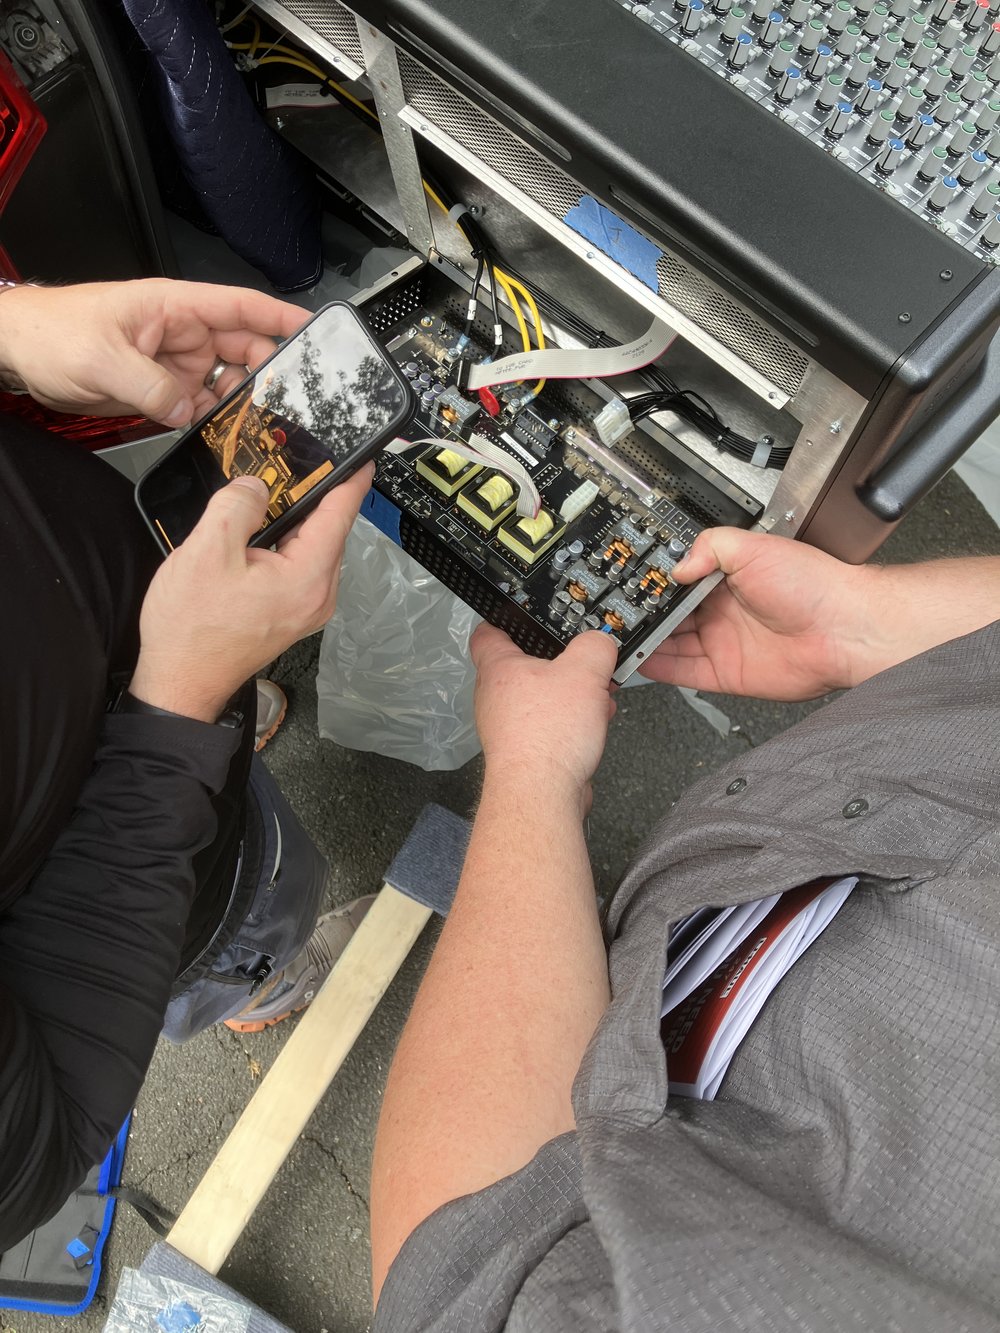 Reattaching the power supplies